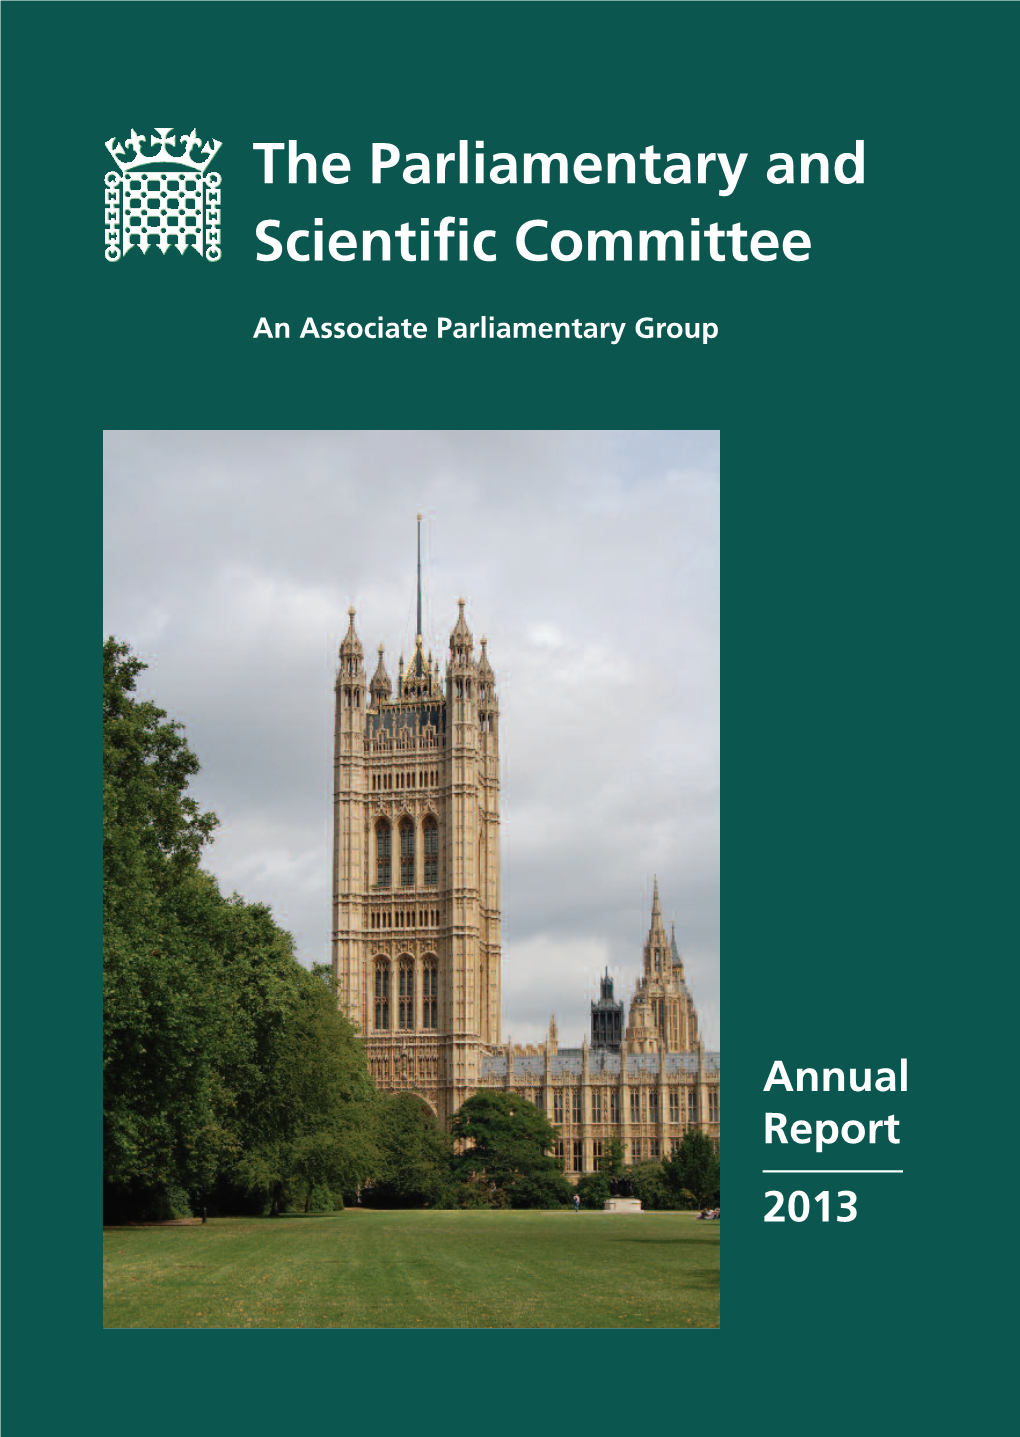 The Parliamentary and Scientific Committee